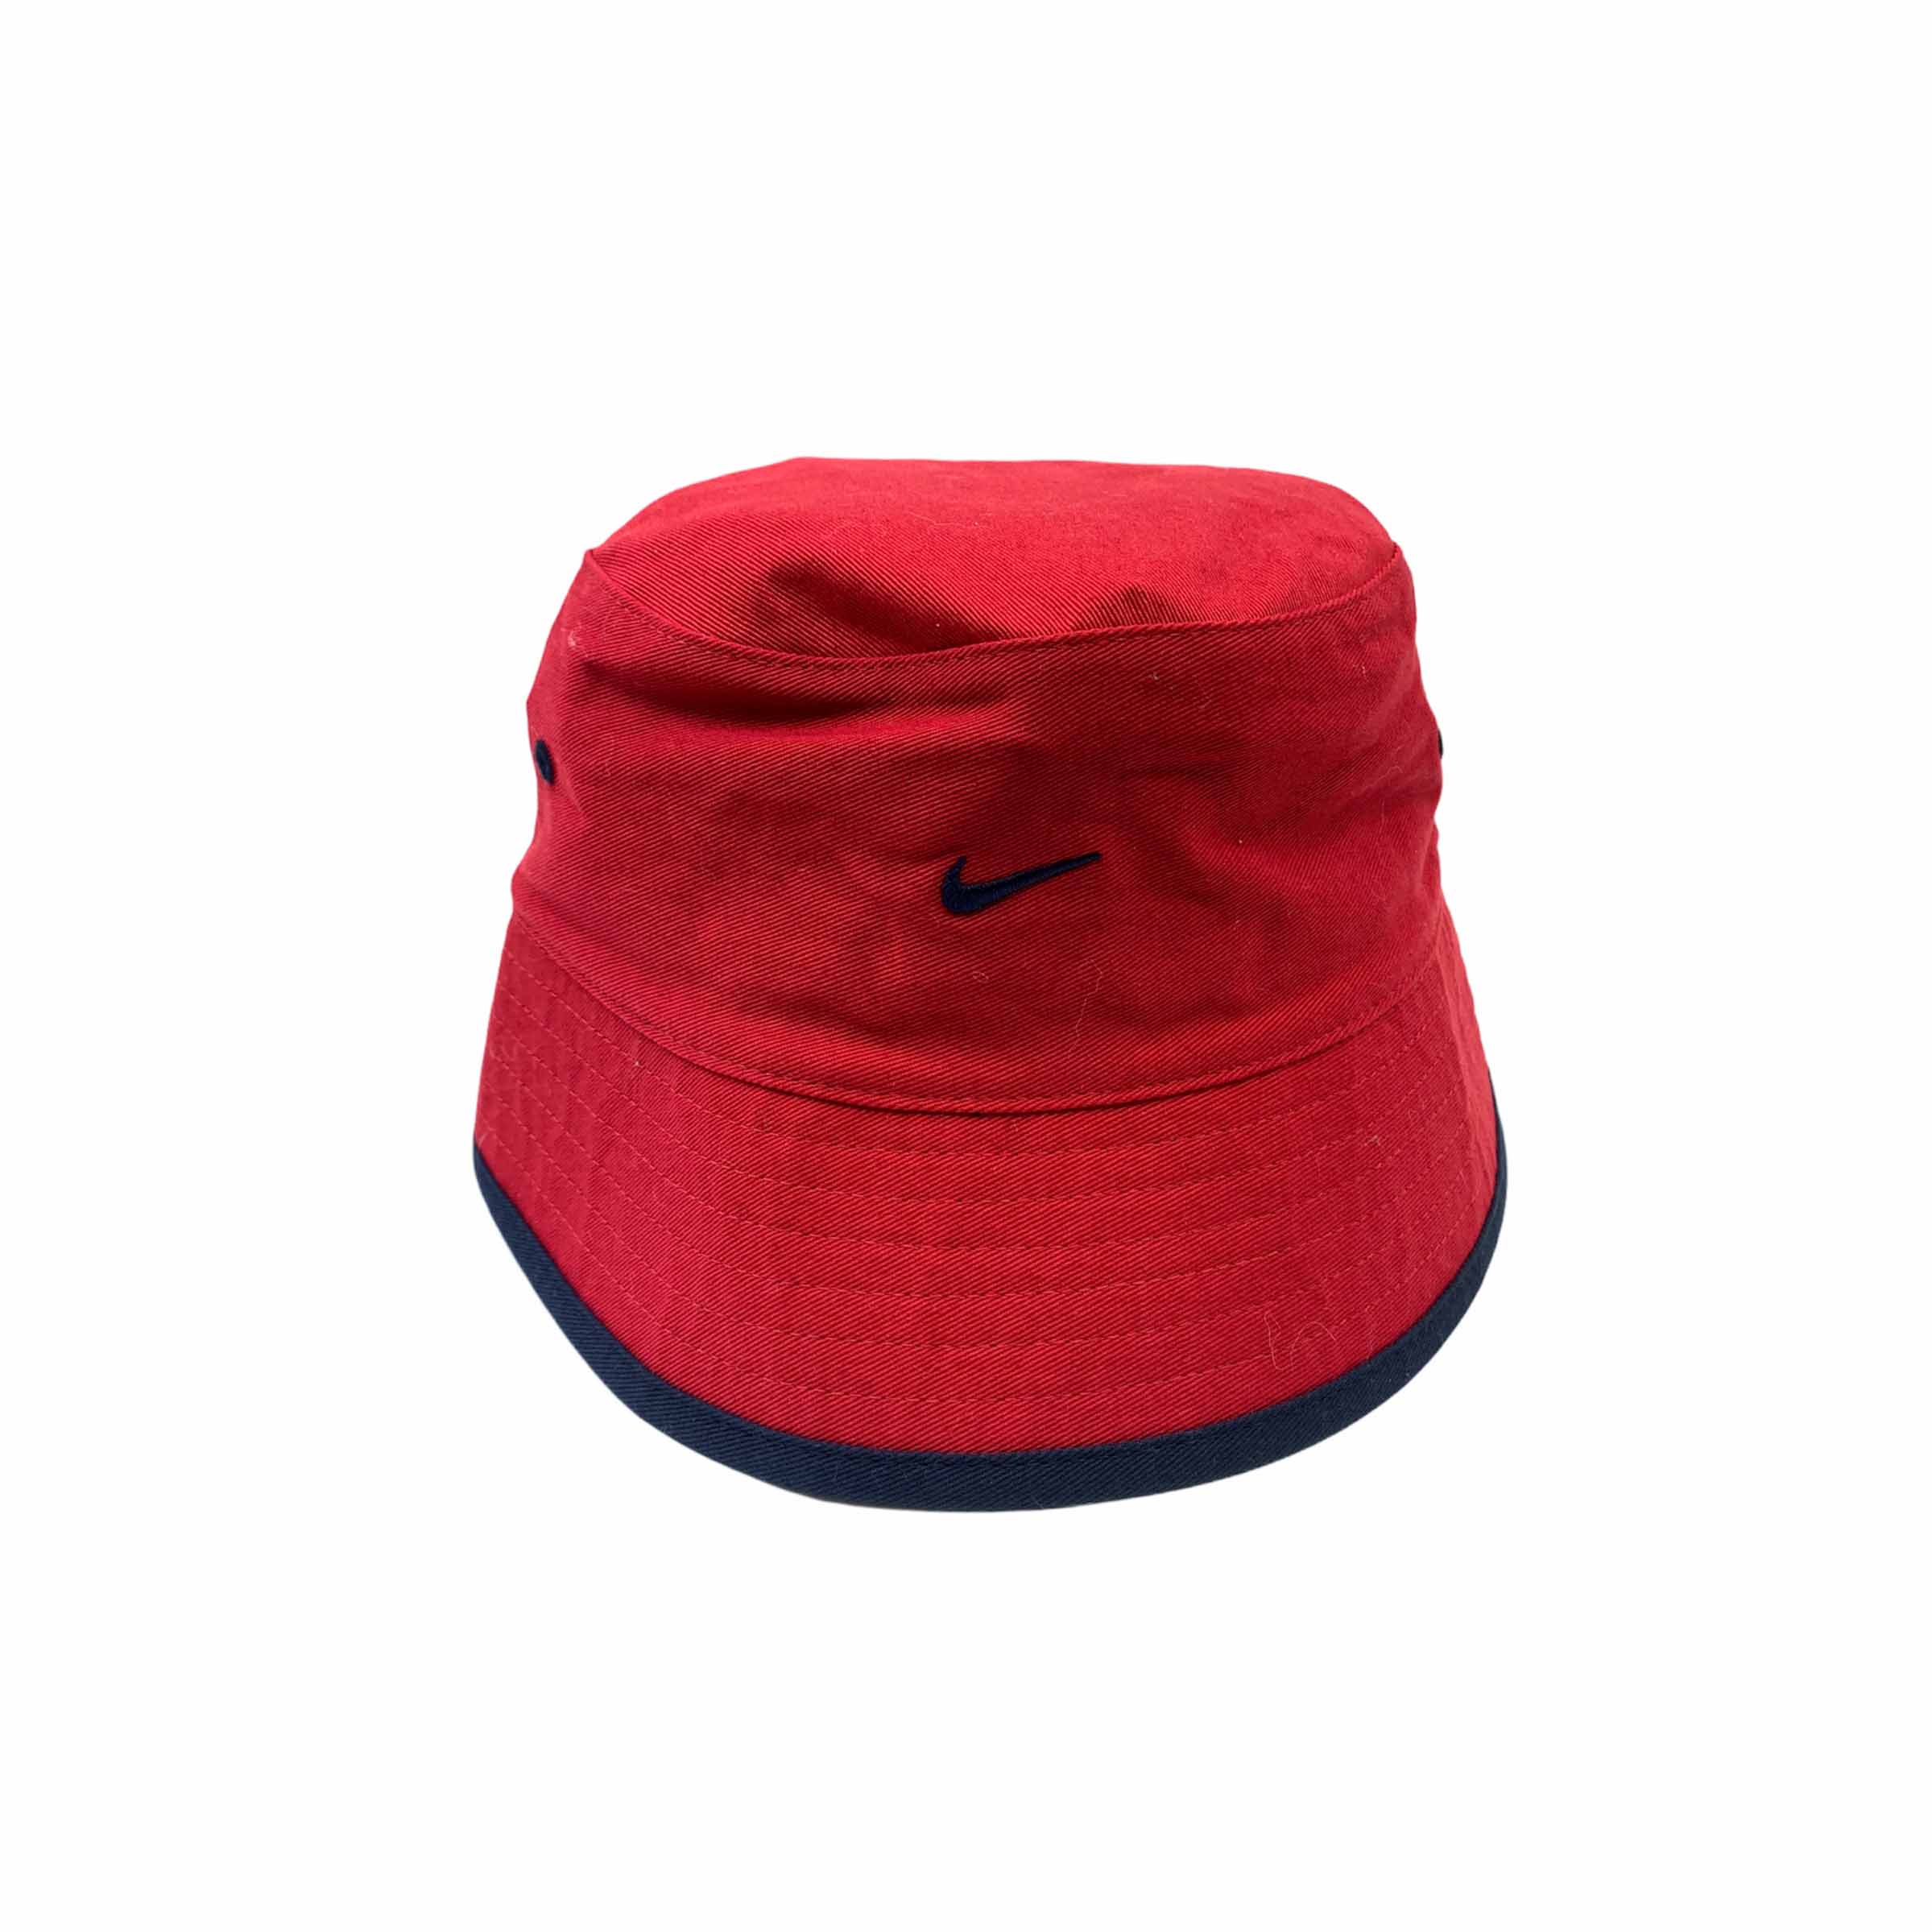 [Nike] Bucket Hat Red - Size Free